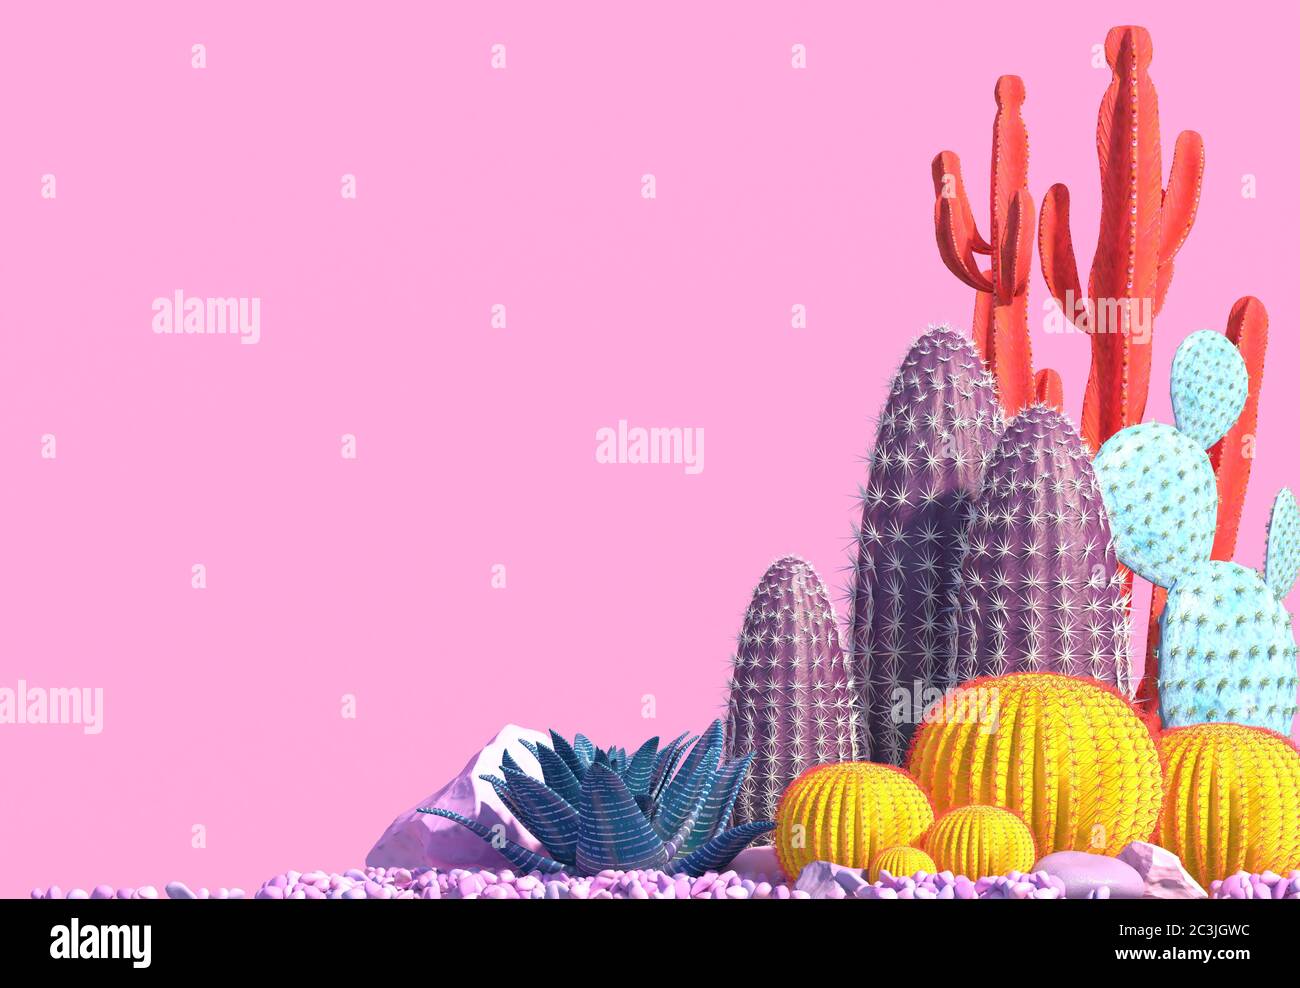 Decorative composition of groups of different species of multicolored cacti on pink background. Contemporary art. Сopy space. 3D rendering. Stock Photo